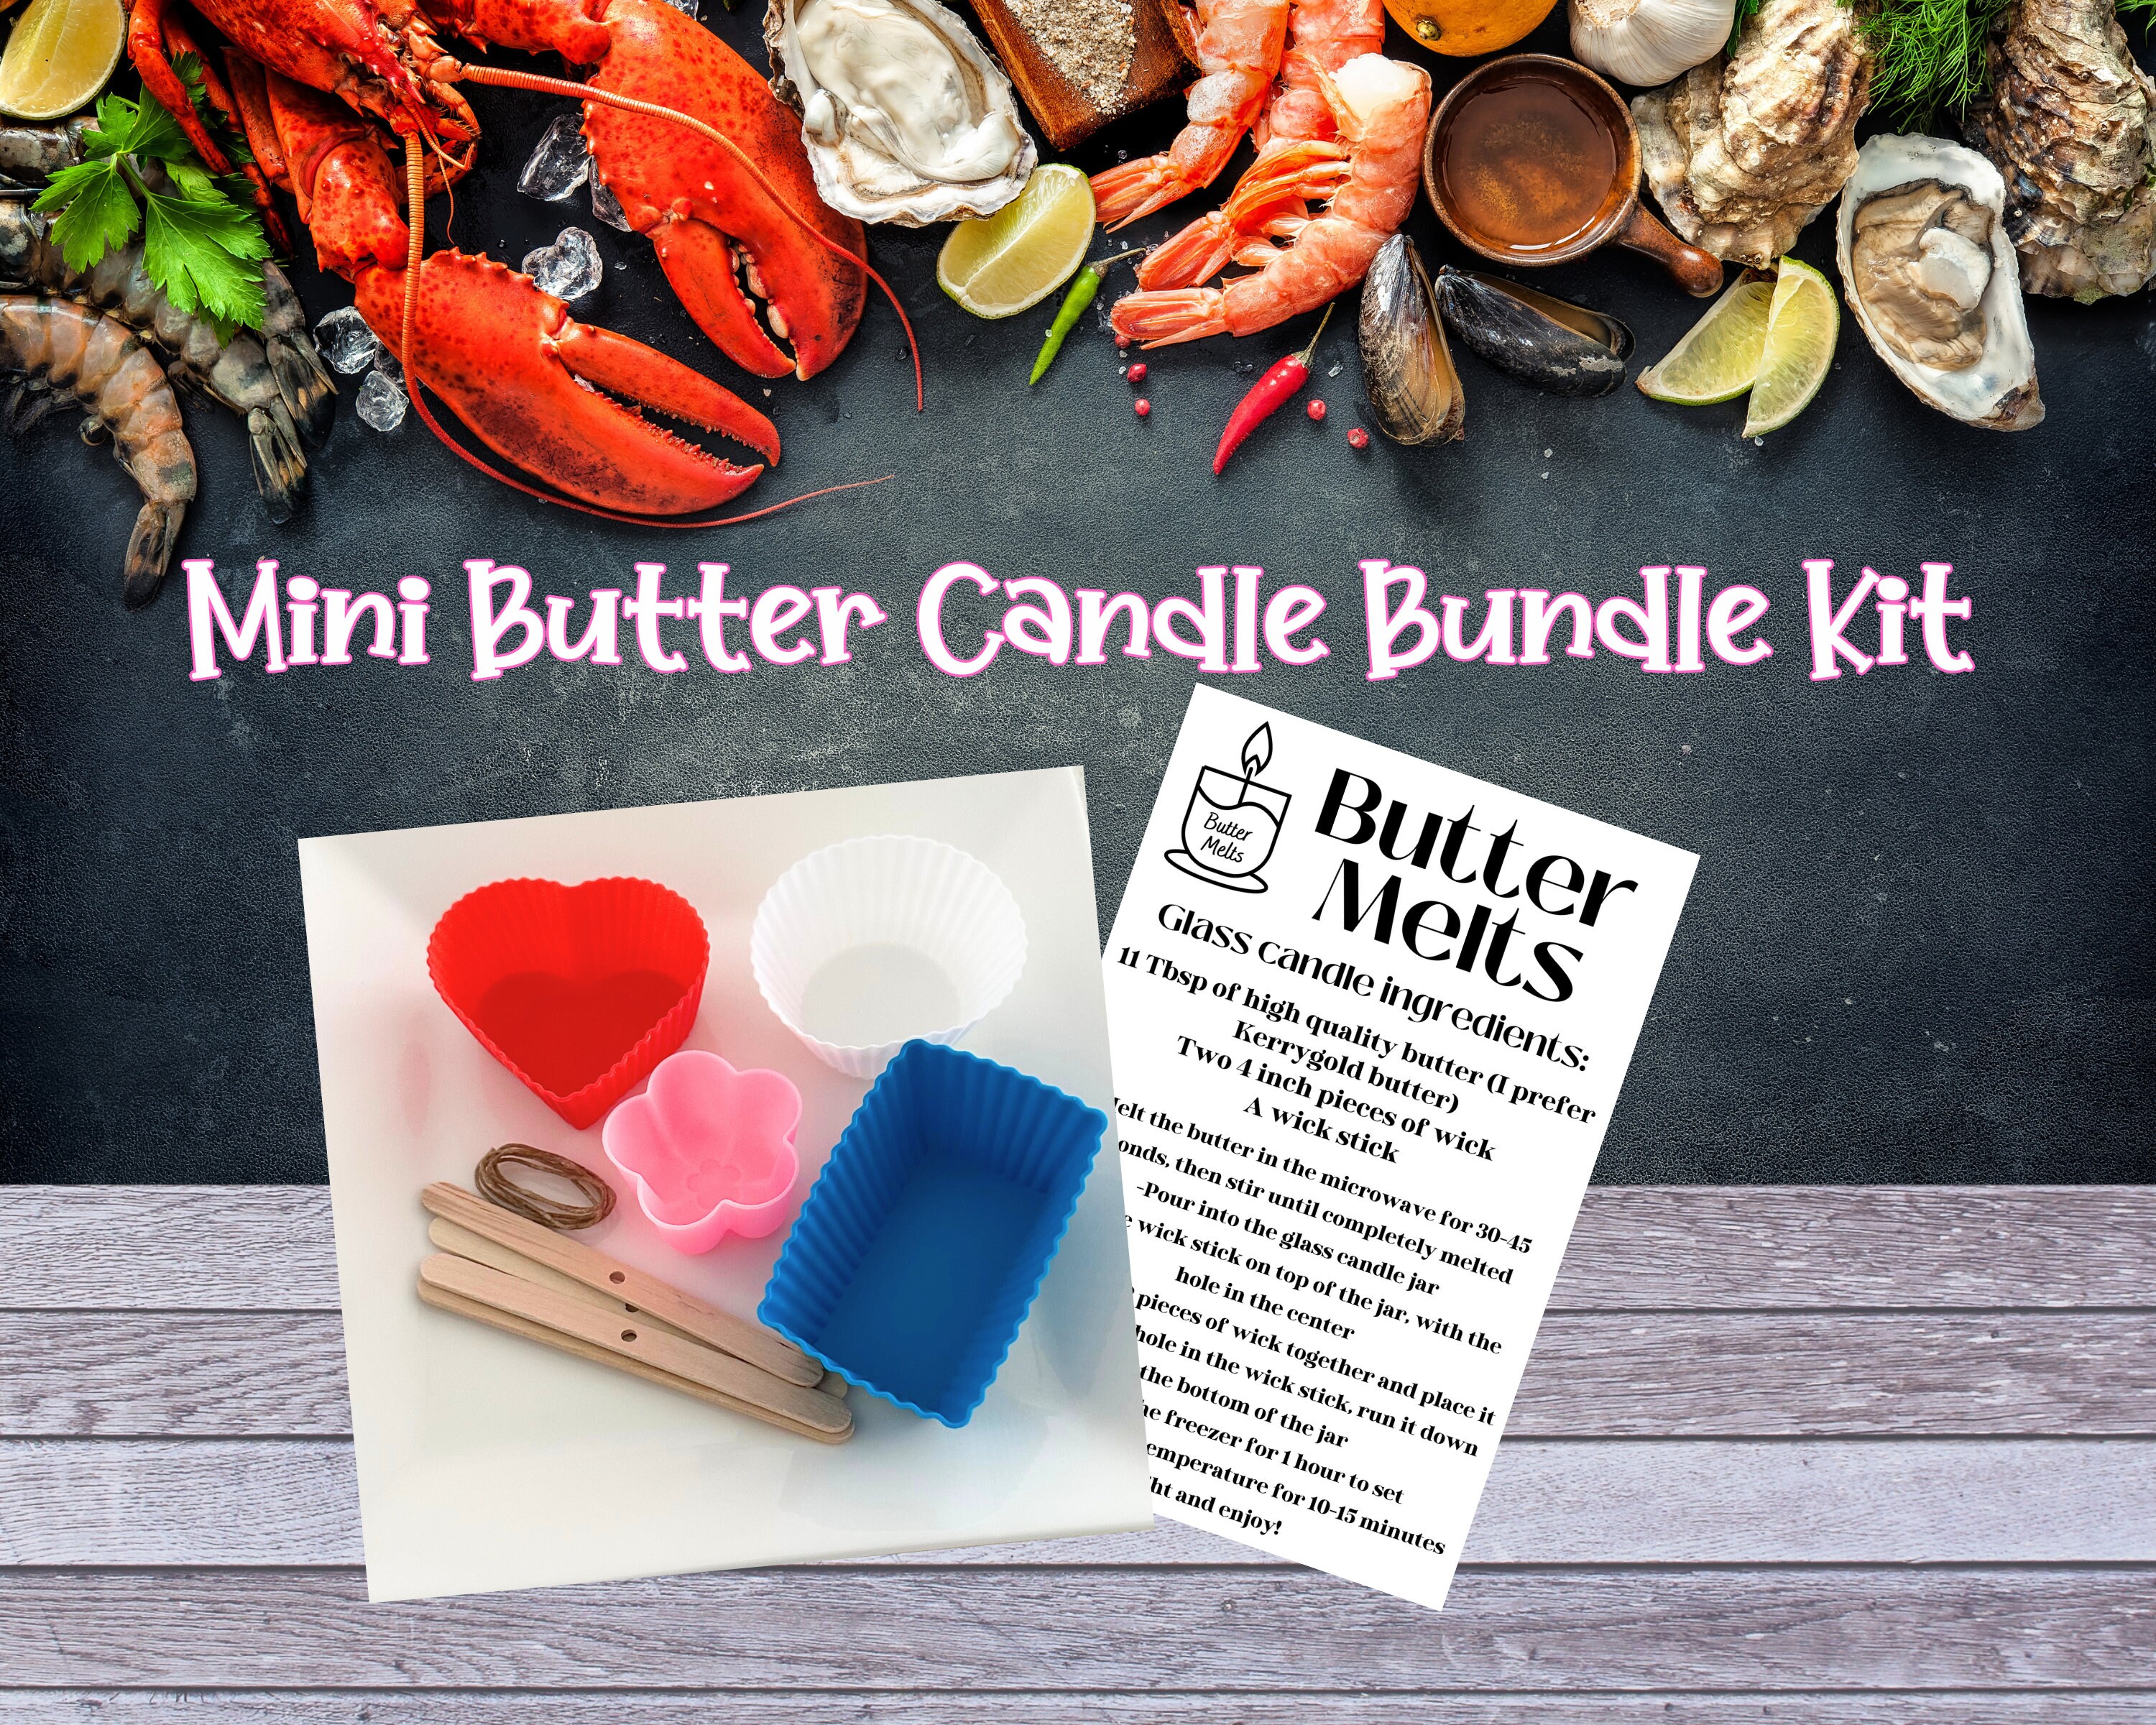 DIY Butter Candle Bundle Kit, Create Delicious Artisanal Butter Candles,  Trendy Dinner Party or Date Night Idea, Bougie Charcuterie Decor 